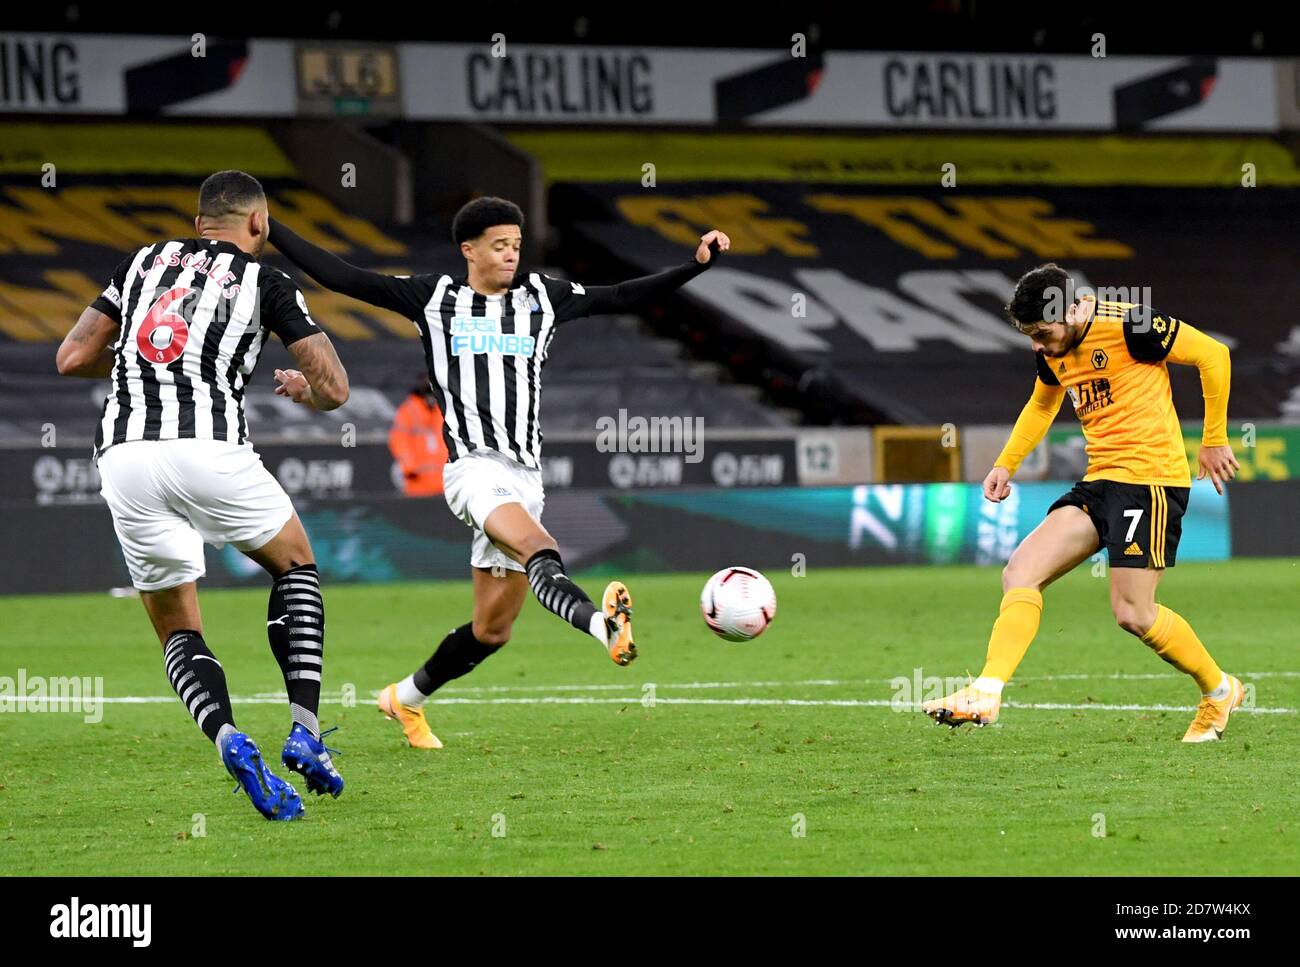 Wolverhampton Wanderers' Pedro Neto (right) has a shot on goal during the Premier League match at Molineux, Wolverhampton. Stock Photo